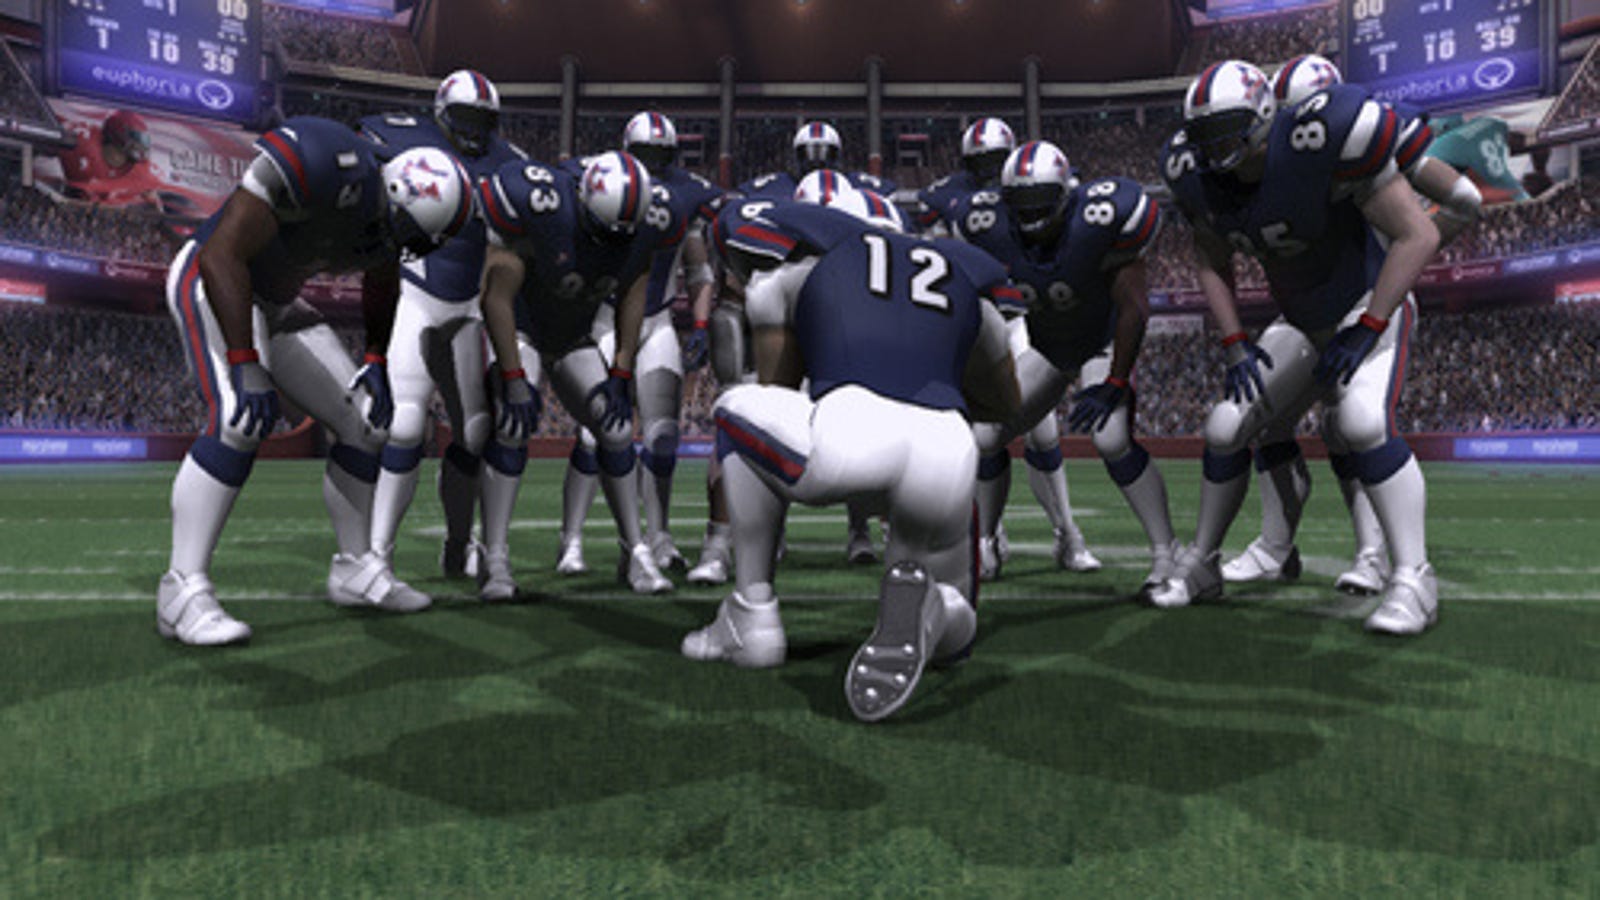 Introducing Soccer Relegation to American Football — in a Video Game